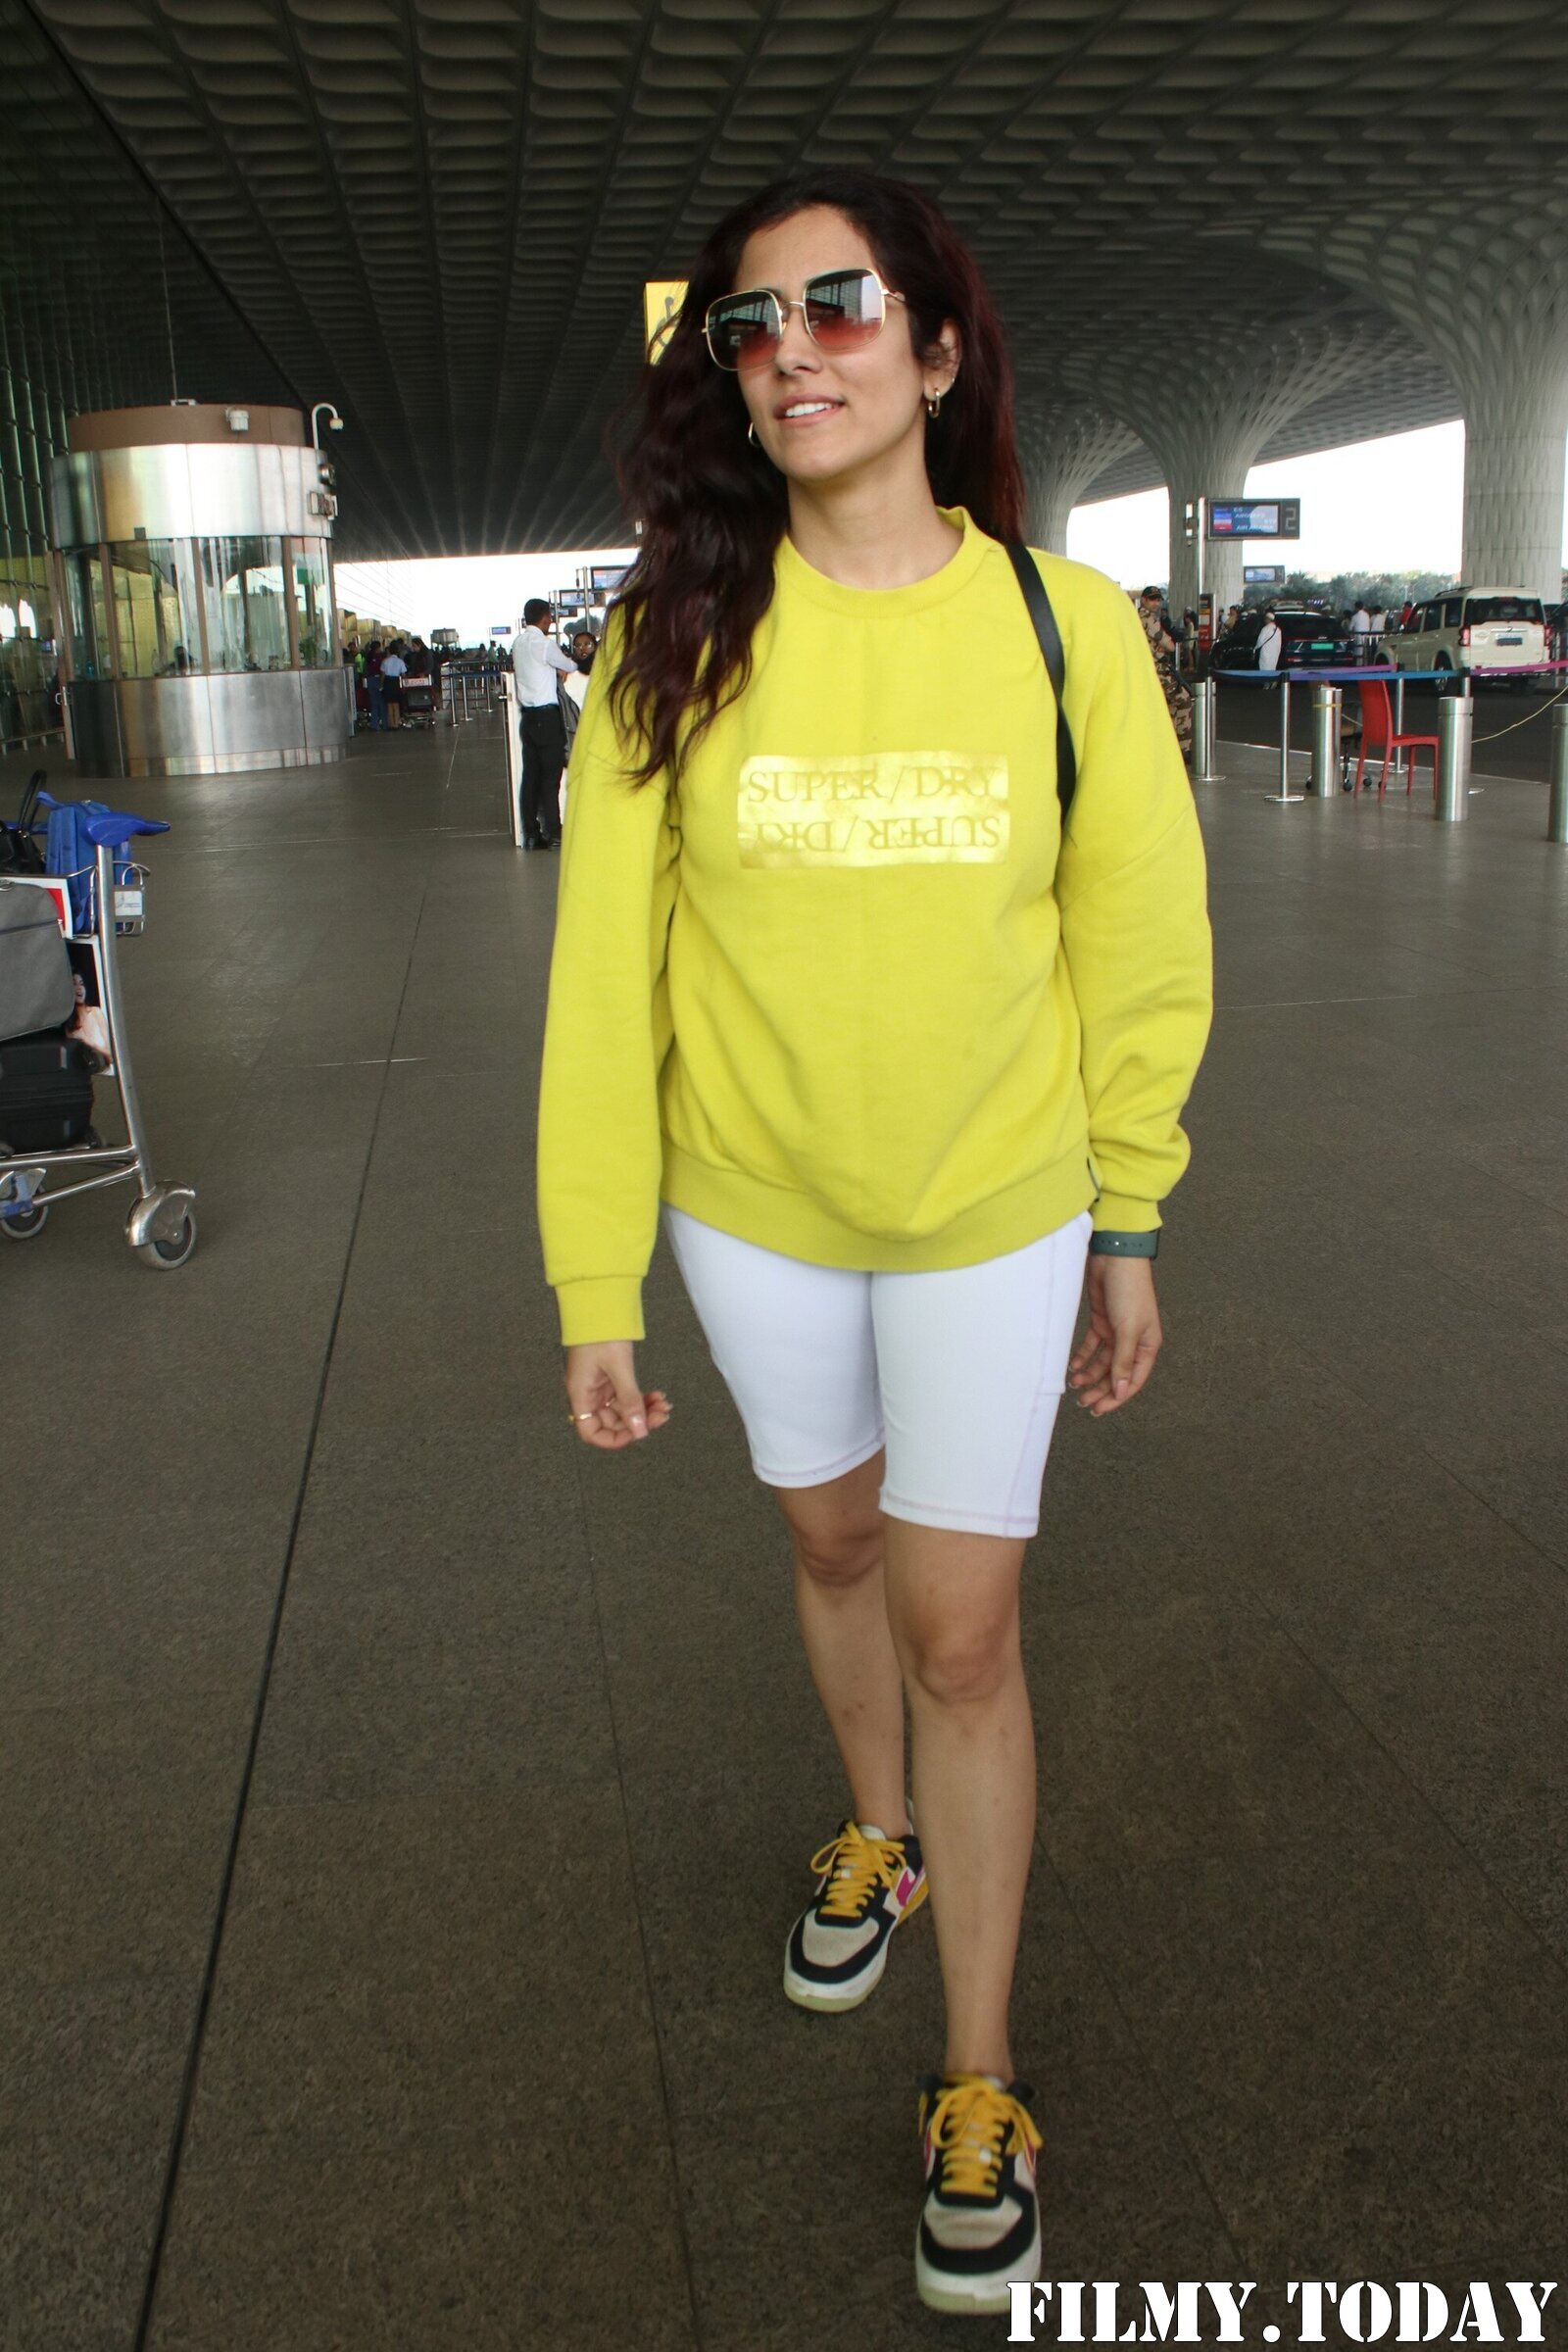 Jonita Gandhi - Photos: Celebs Spotted At Airport | Picture 1947233